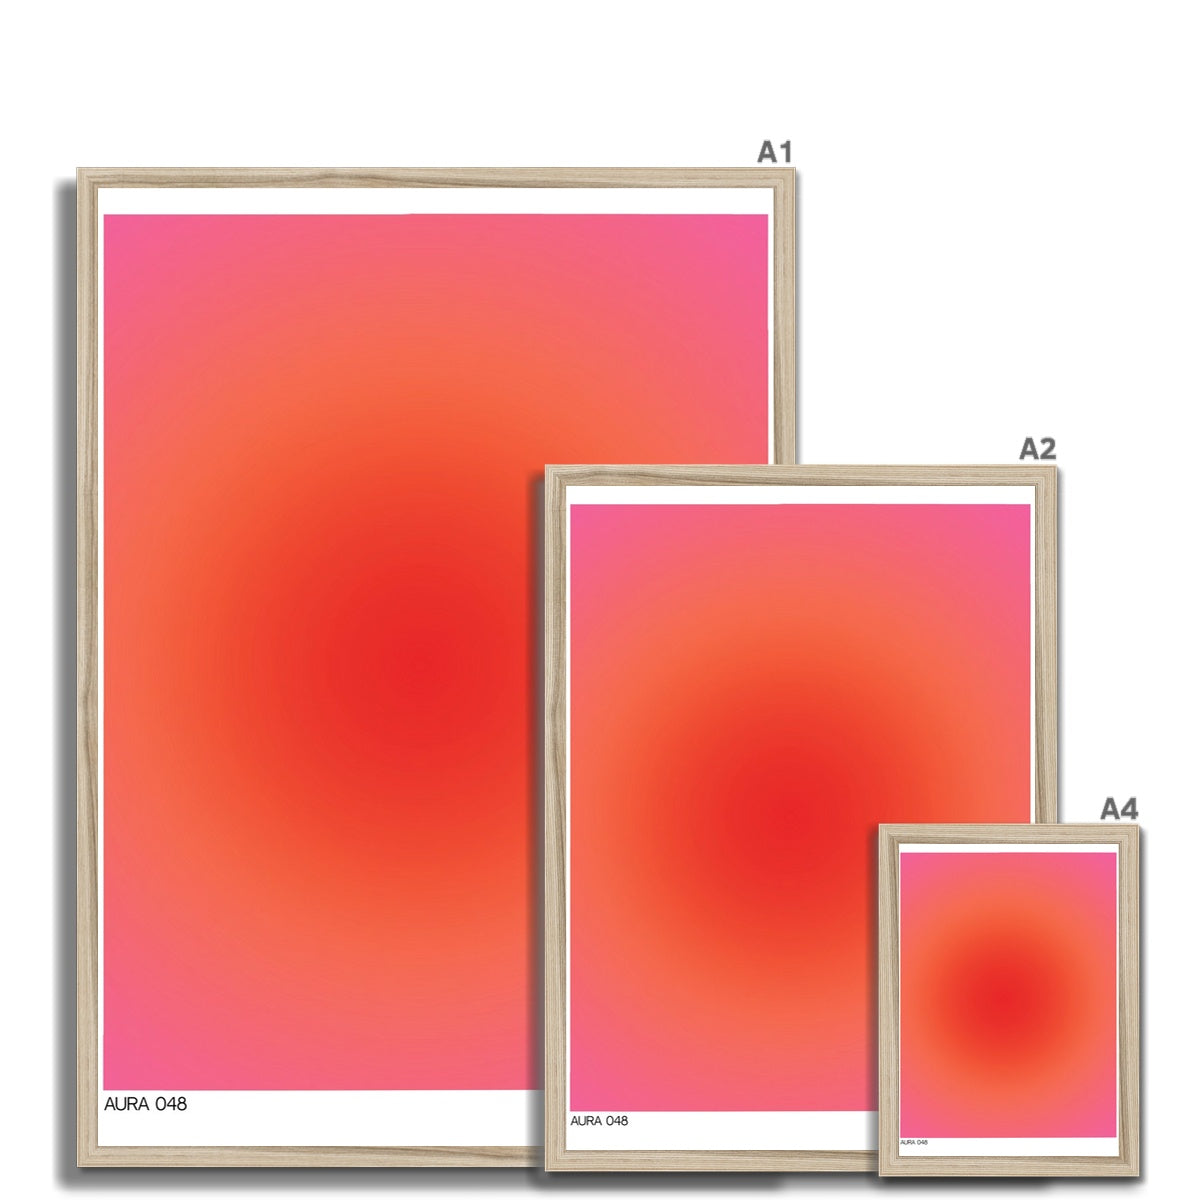 © les muses / One of a hundred dreamy pastel auras in a collection of aesthetic gradient wall art prints. The aura collection features an endless array of colorful and vibrant abstract gradients perfect for those looking for a wide selection of original prints and posters.